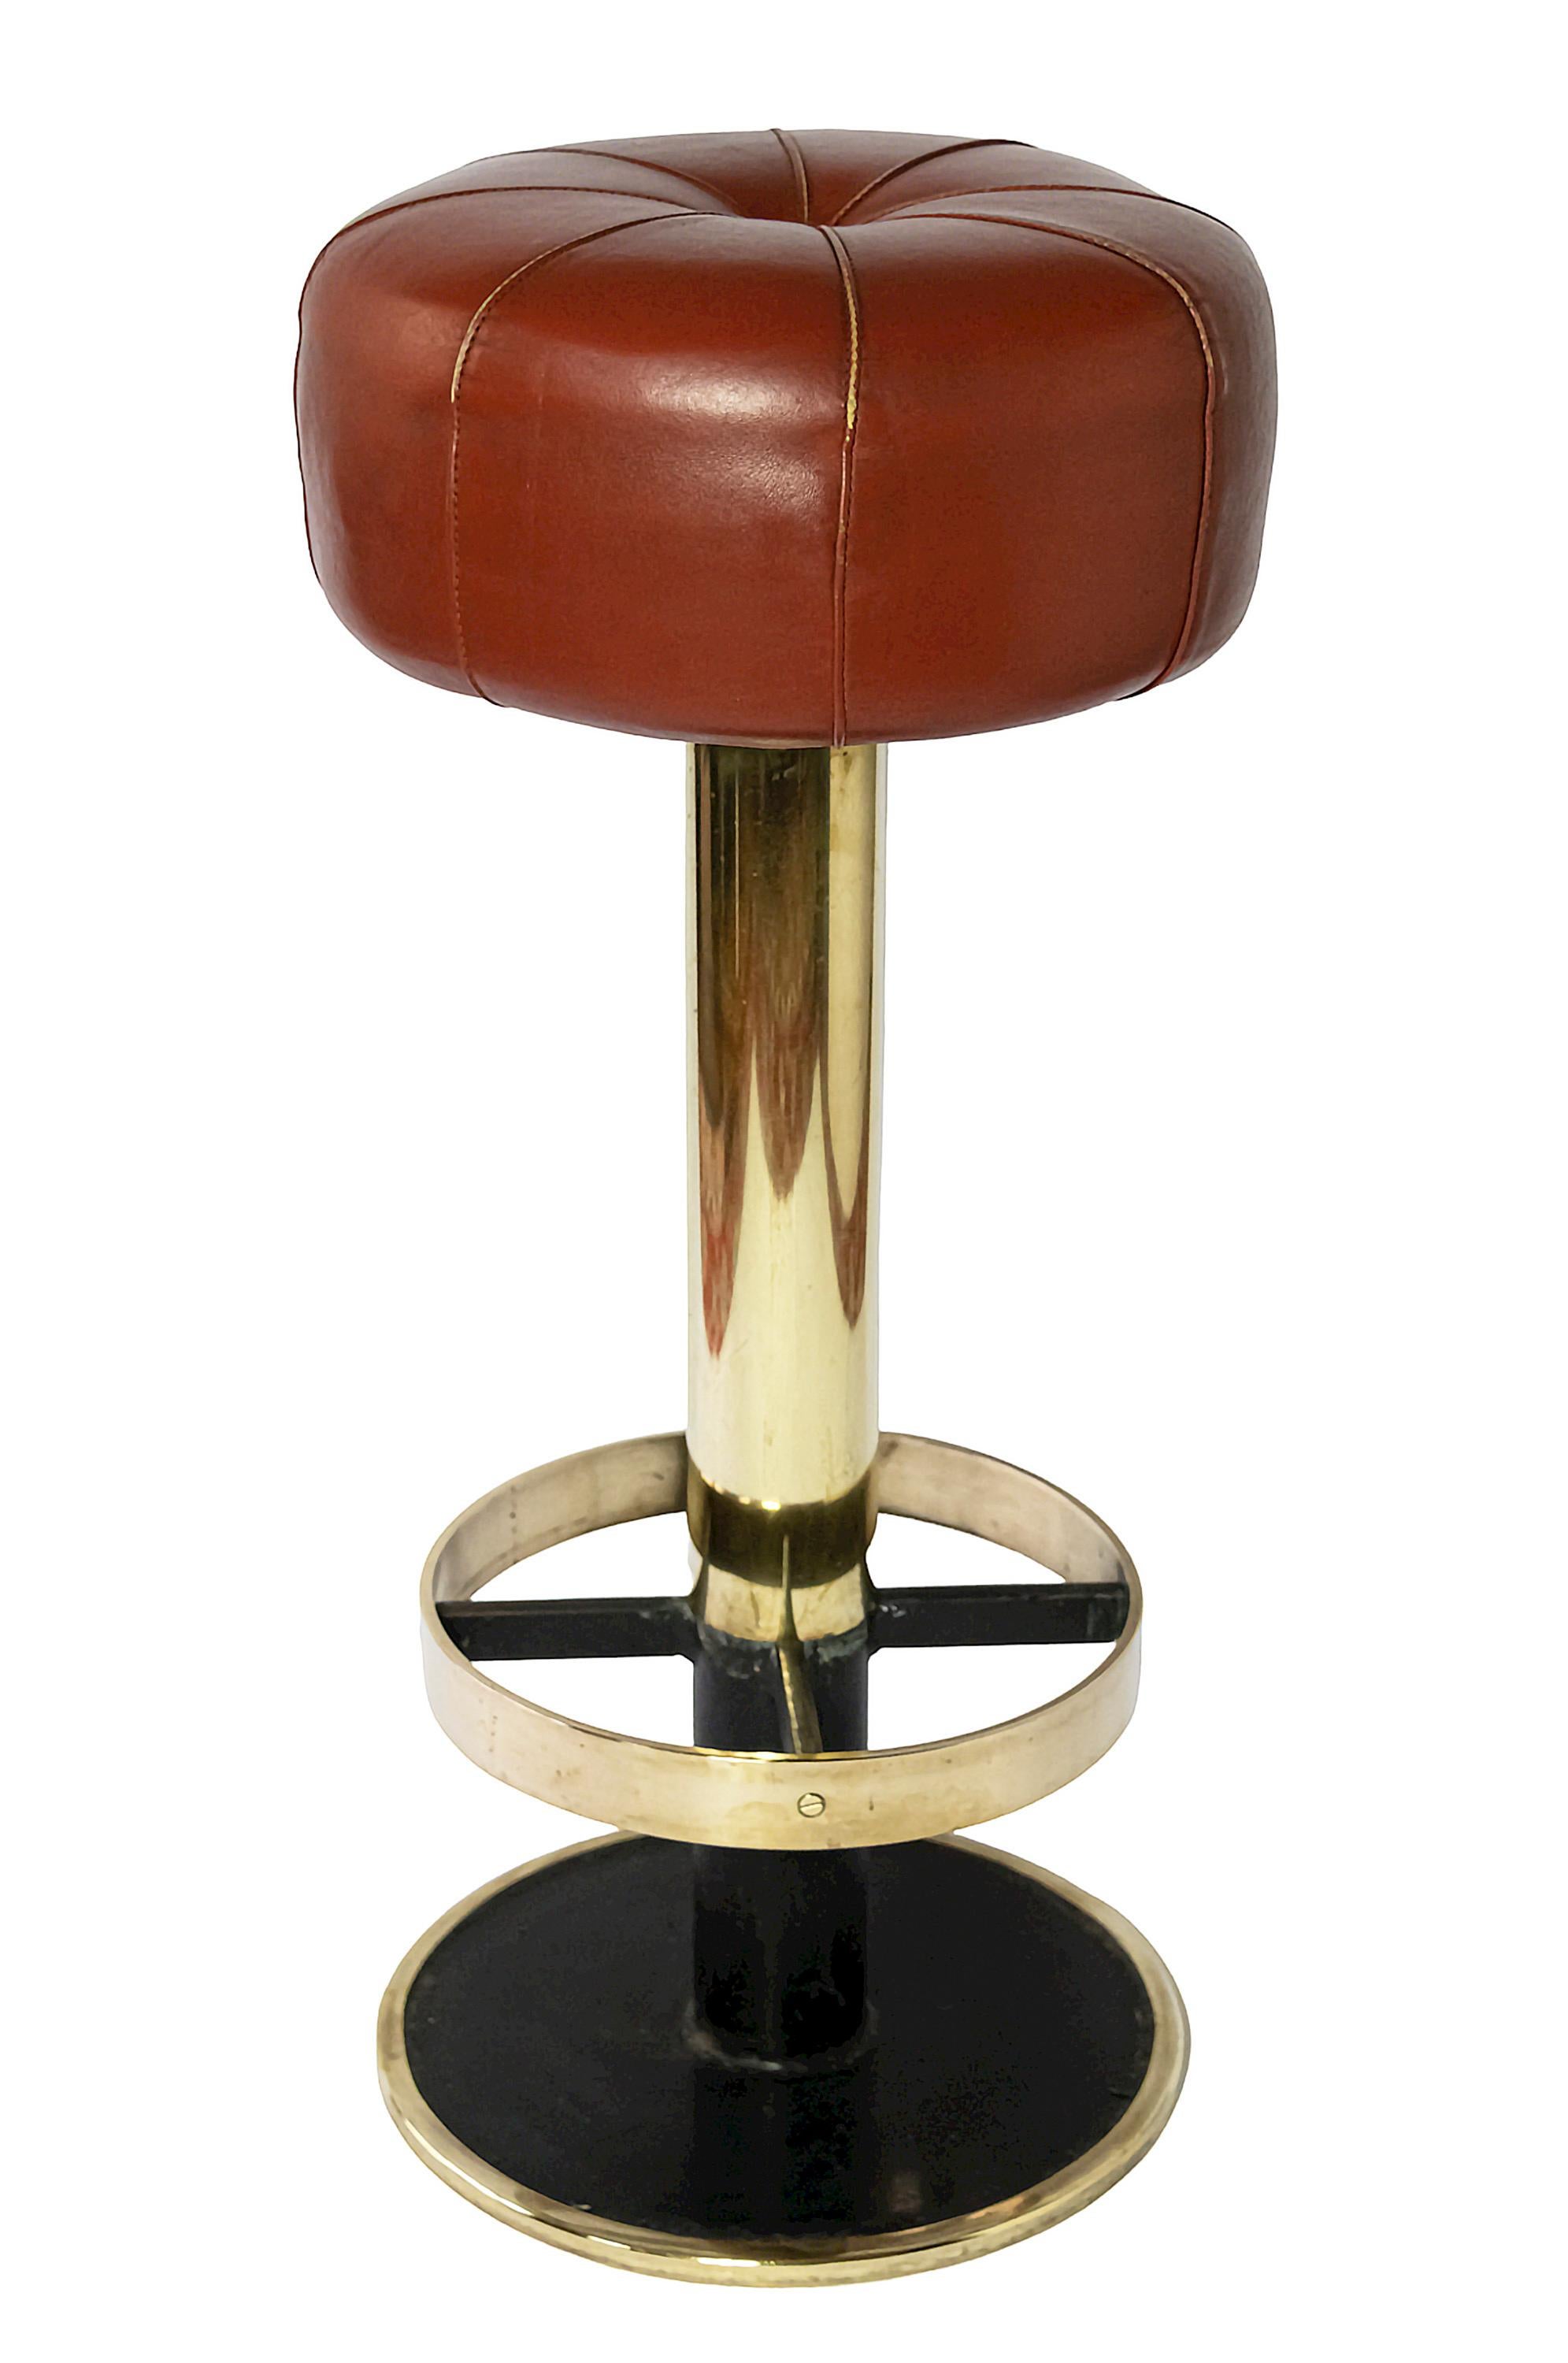 The base is made of brass and steel with ochra/brown natural leather upholstery.
Leather is in very good condition, no cracks and other defects.
Each stool weights 21 kg.
The brass is newly polished and looks very fresh and shiny.
Very good/